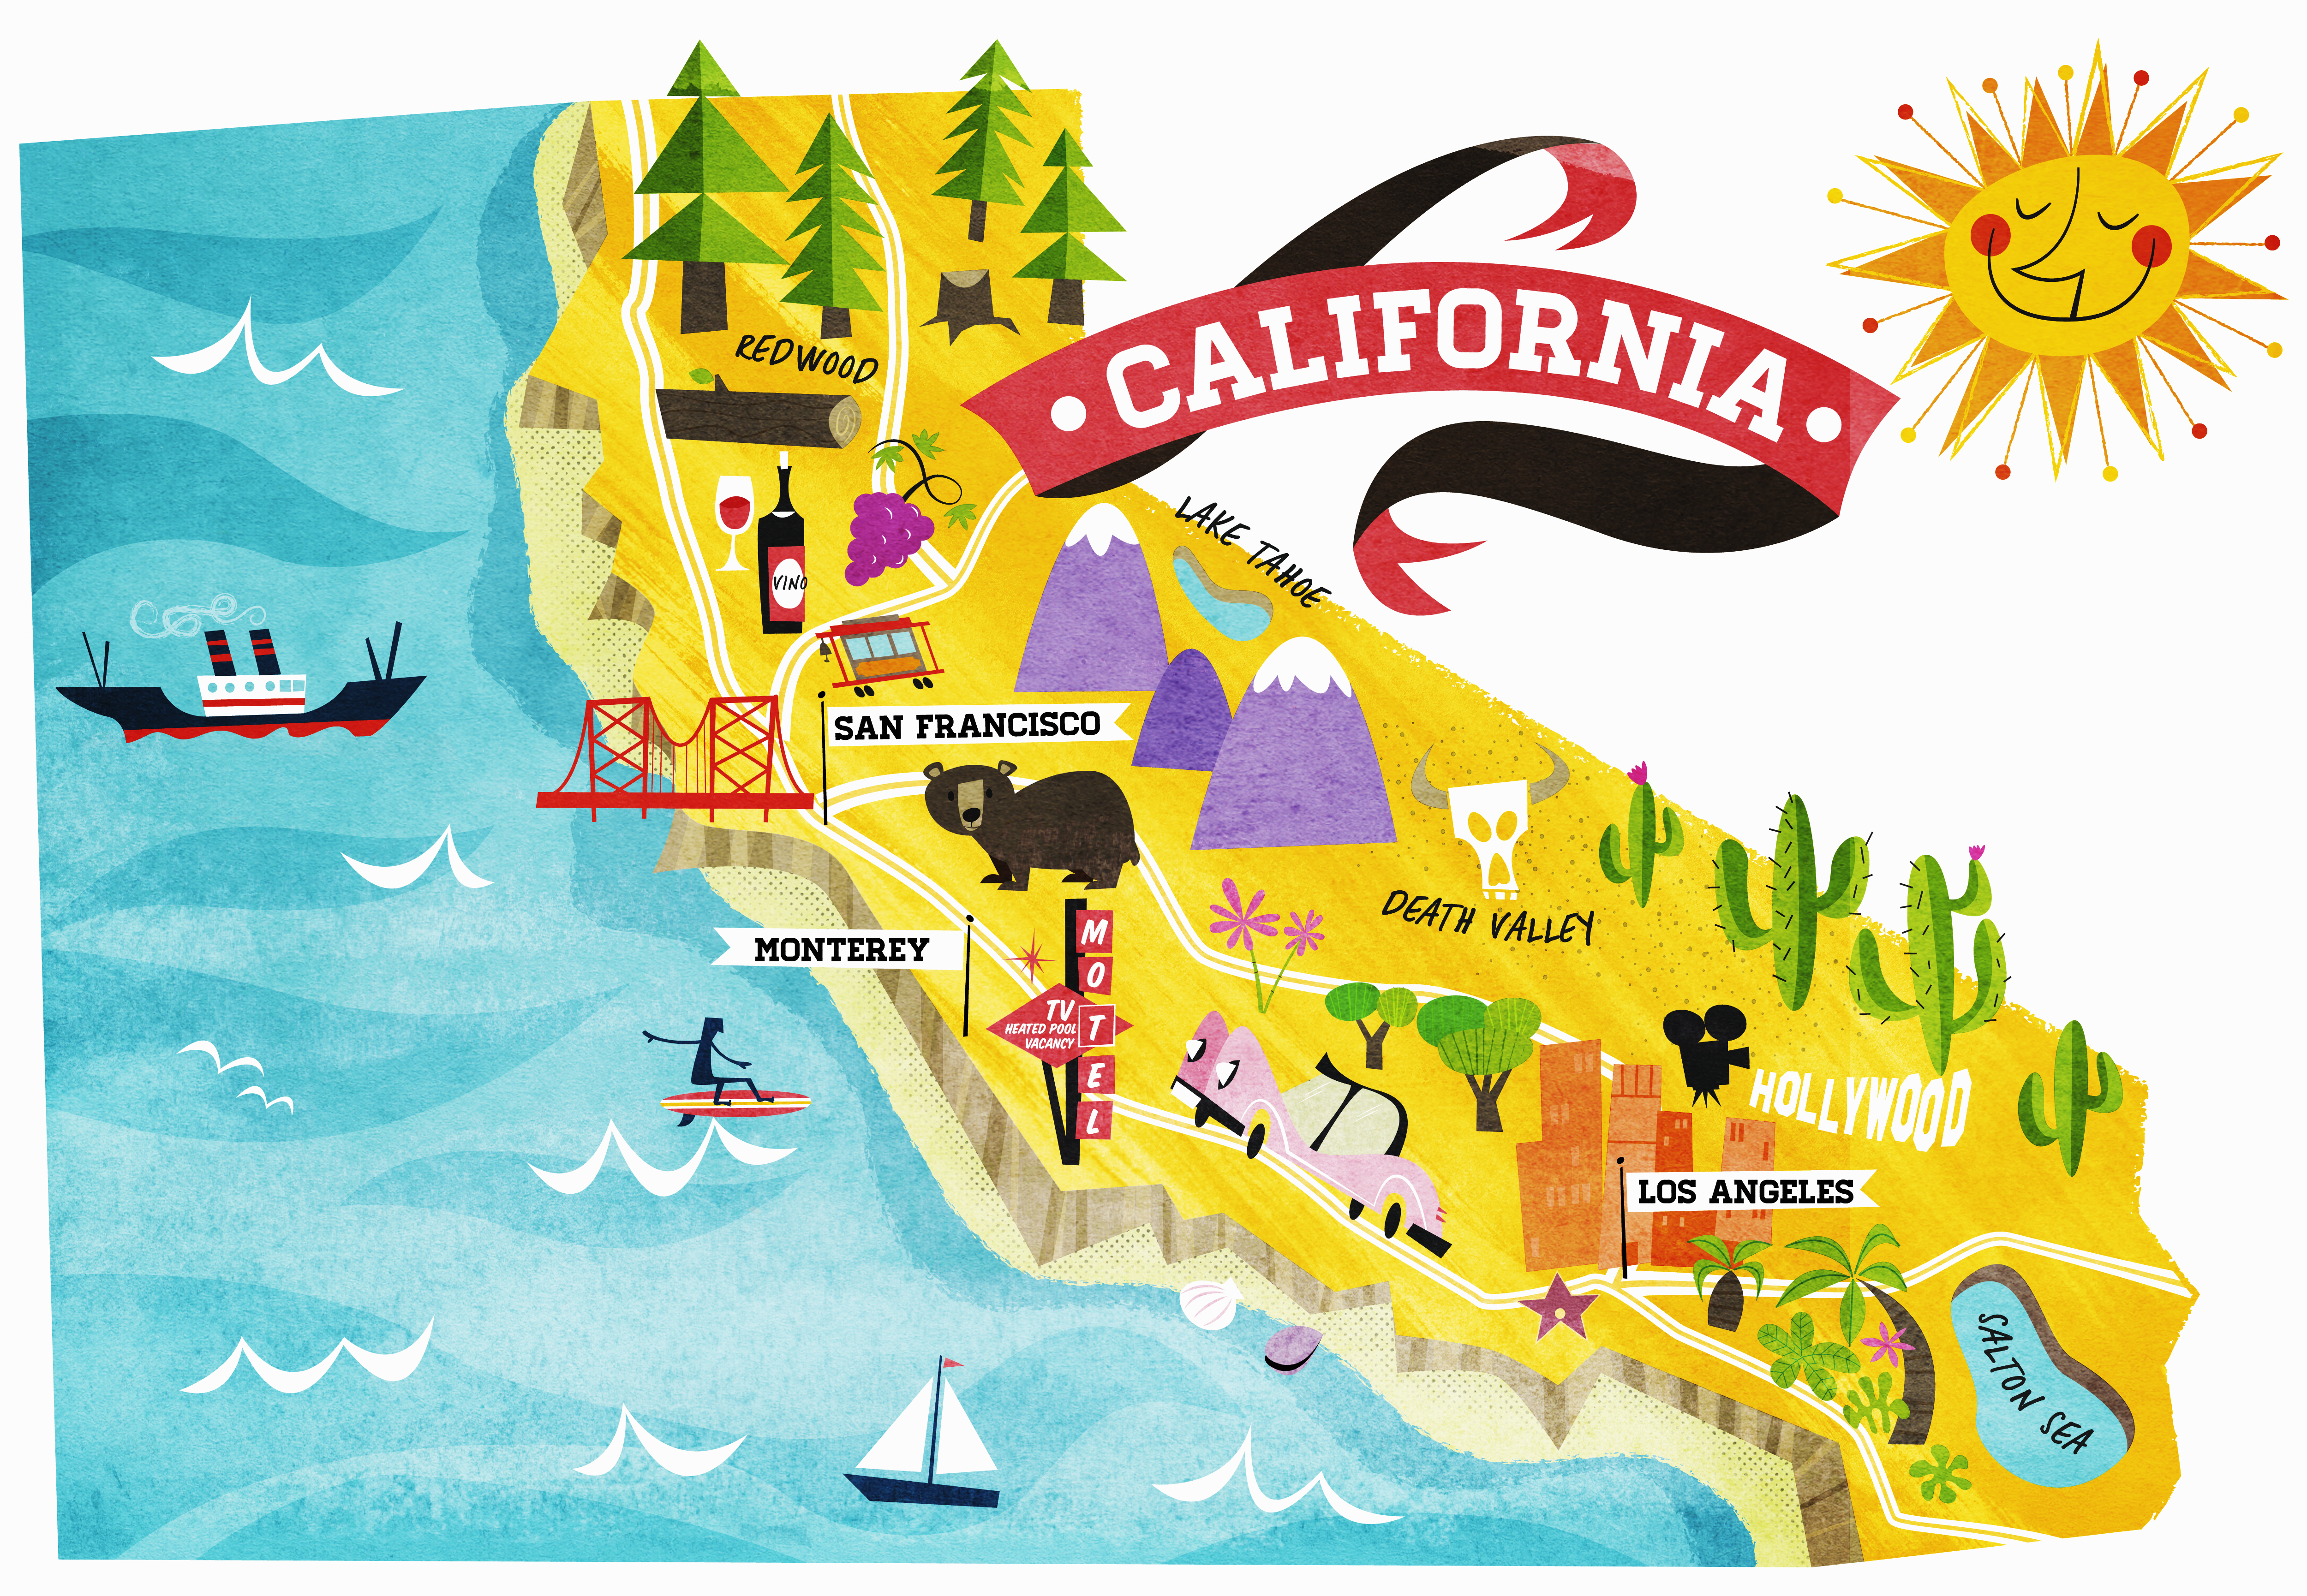 Southern California Attractions Map - Klipy - California Things To Do Map